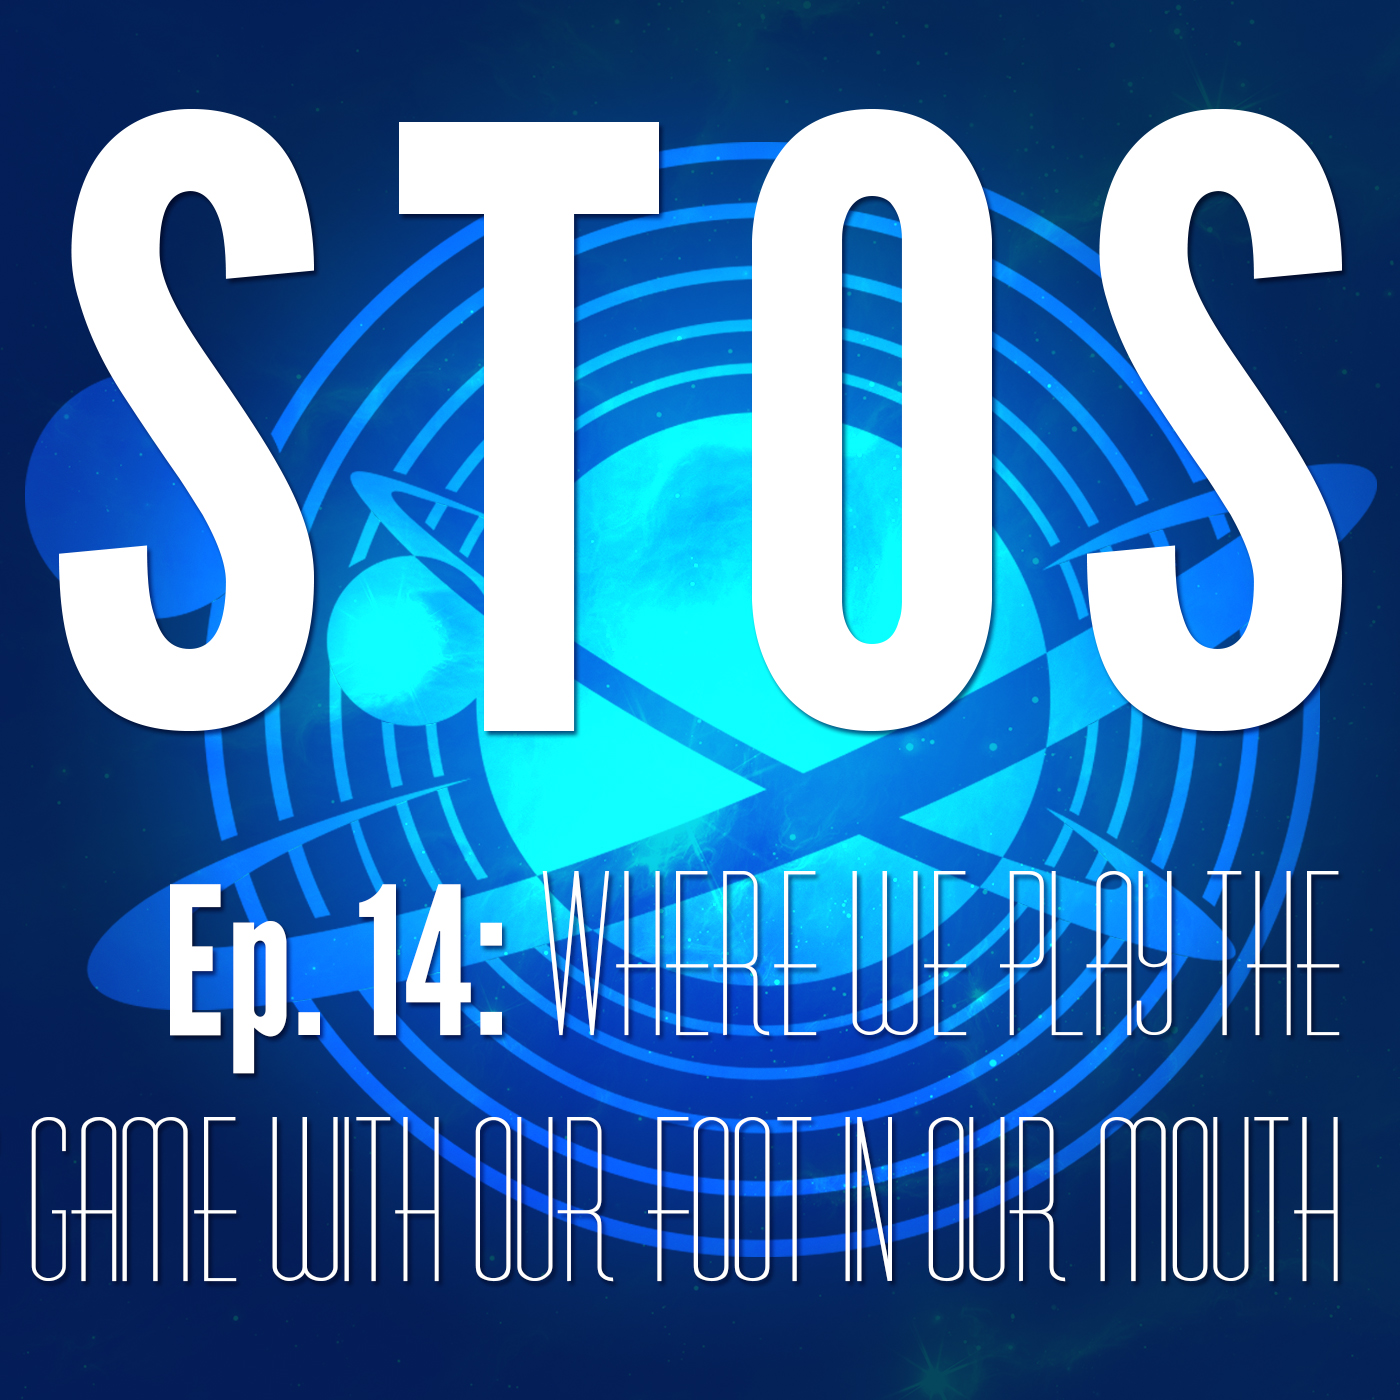 Ep. 14: Where We Play the Waiting Game With Our Feet in Our Mouth